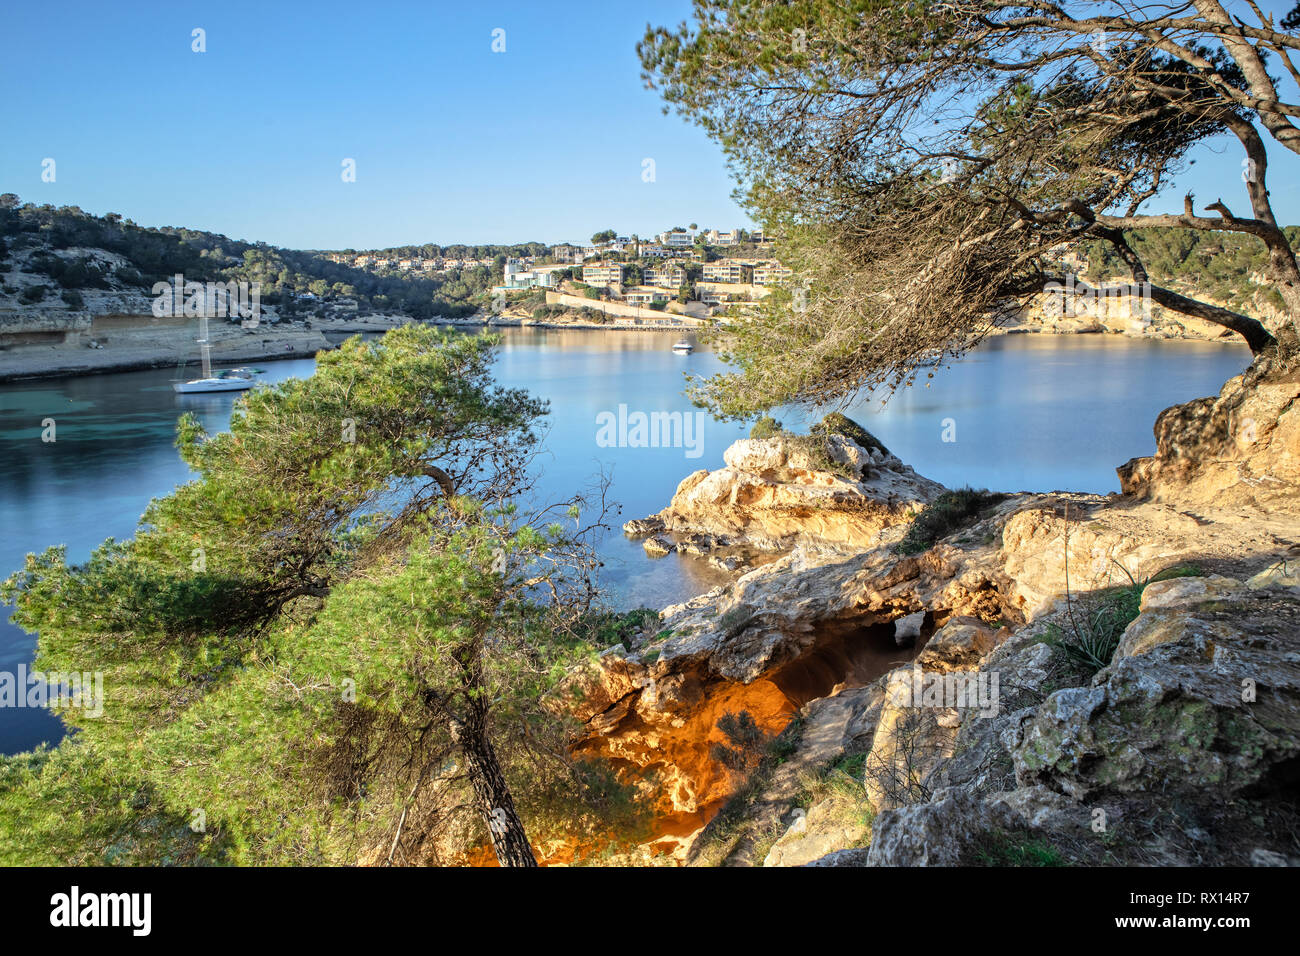 Bay of Portals Vells in Mallorca, Spain at Sunset Stock Photo